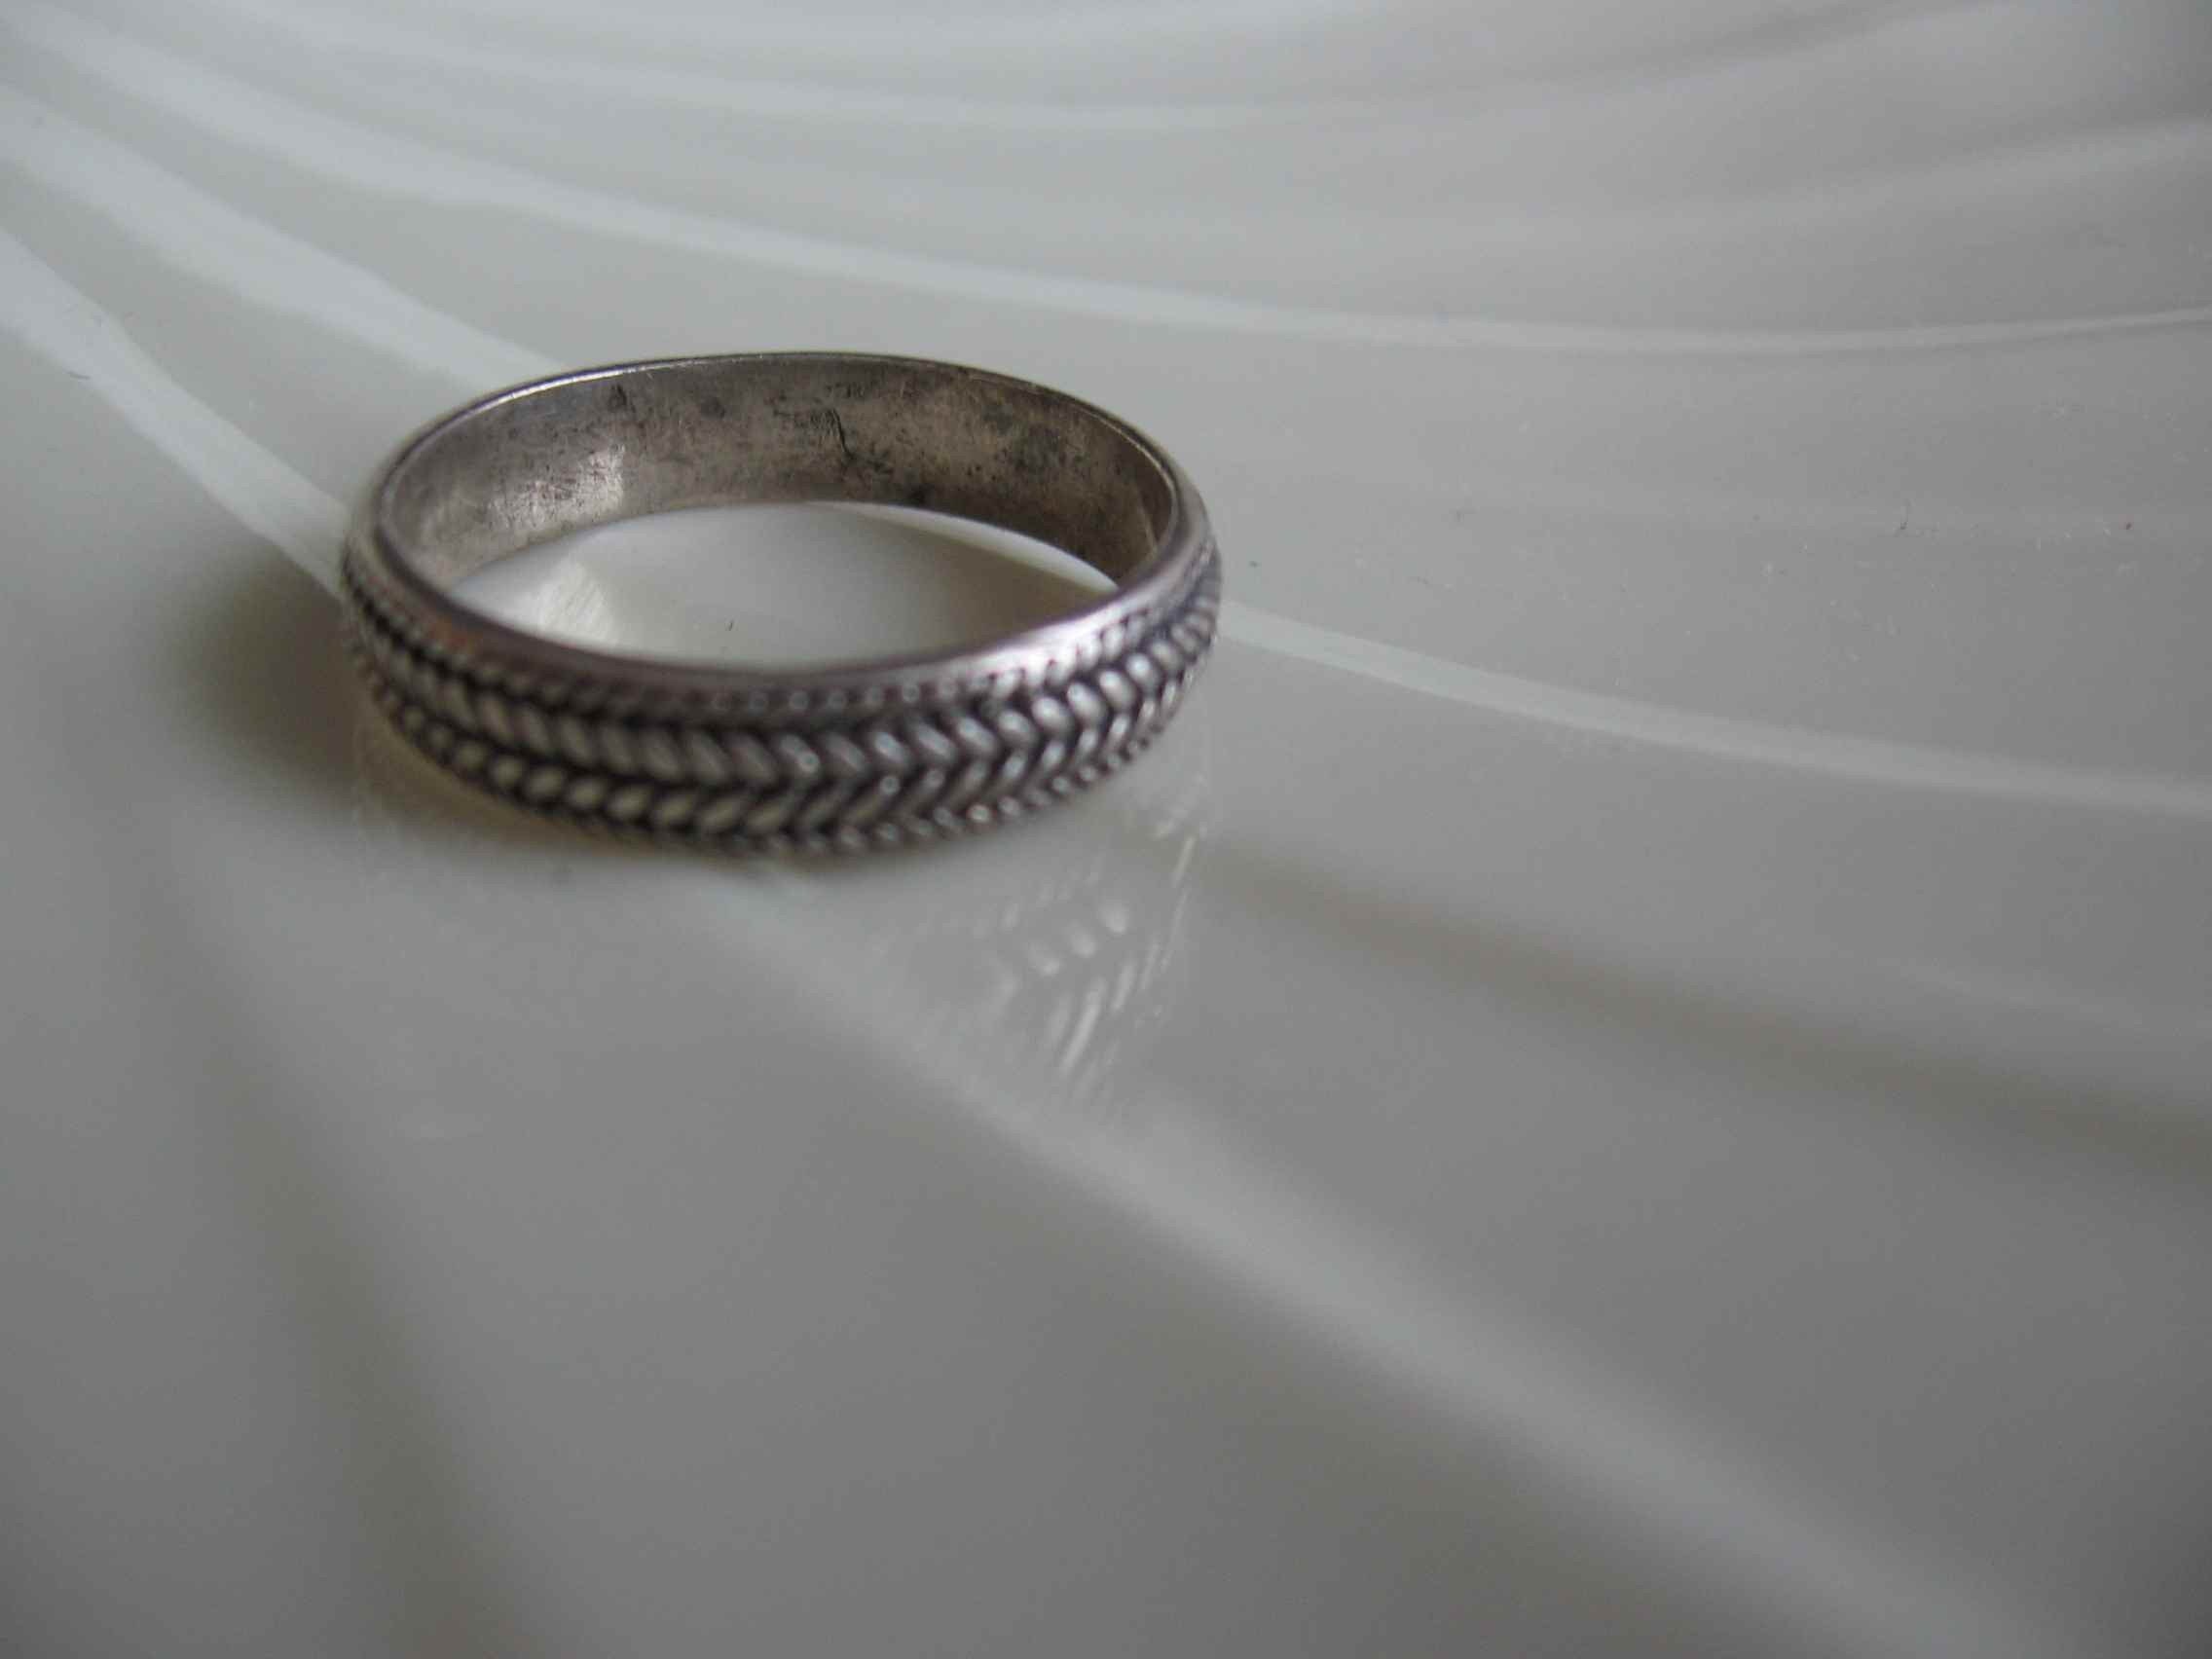 Get Married to Your Honey on the Cheap.  Vintage Men's Sterling Silver Ring Band.  Size 11 ... FREE Shipping to the US